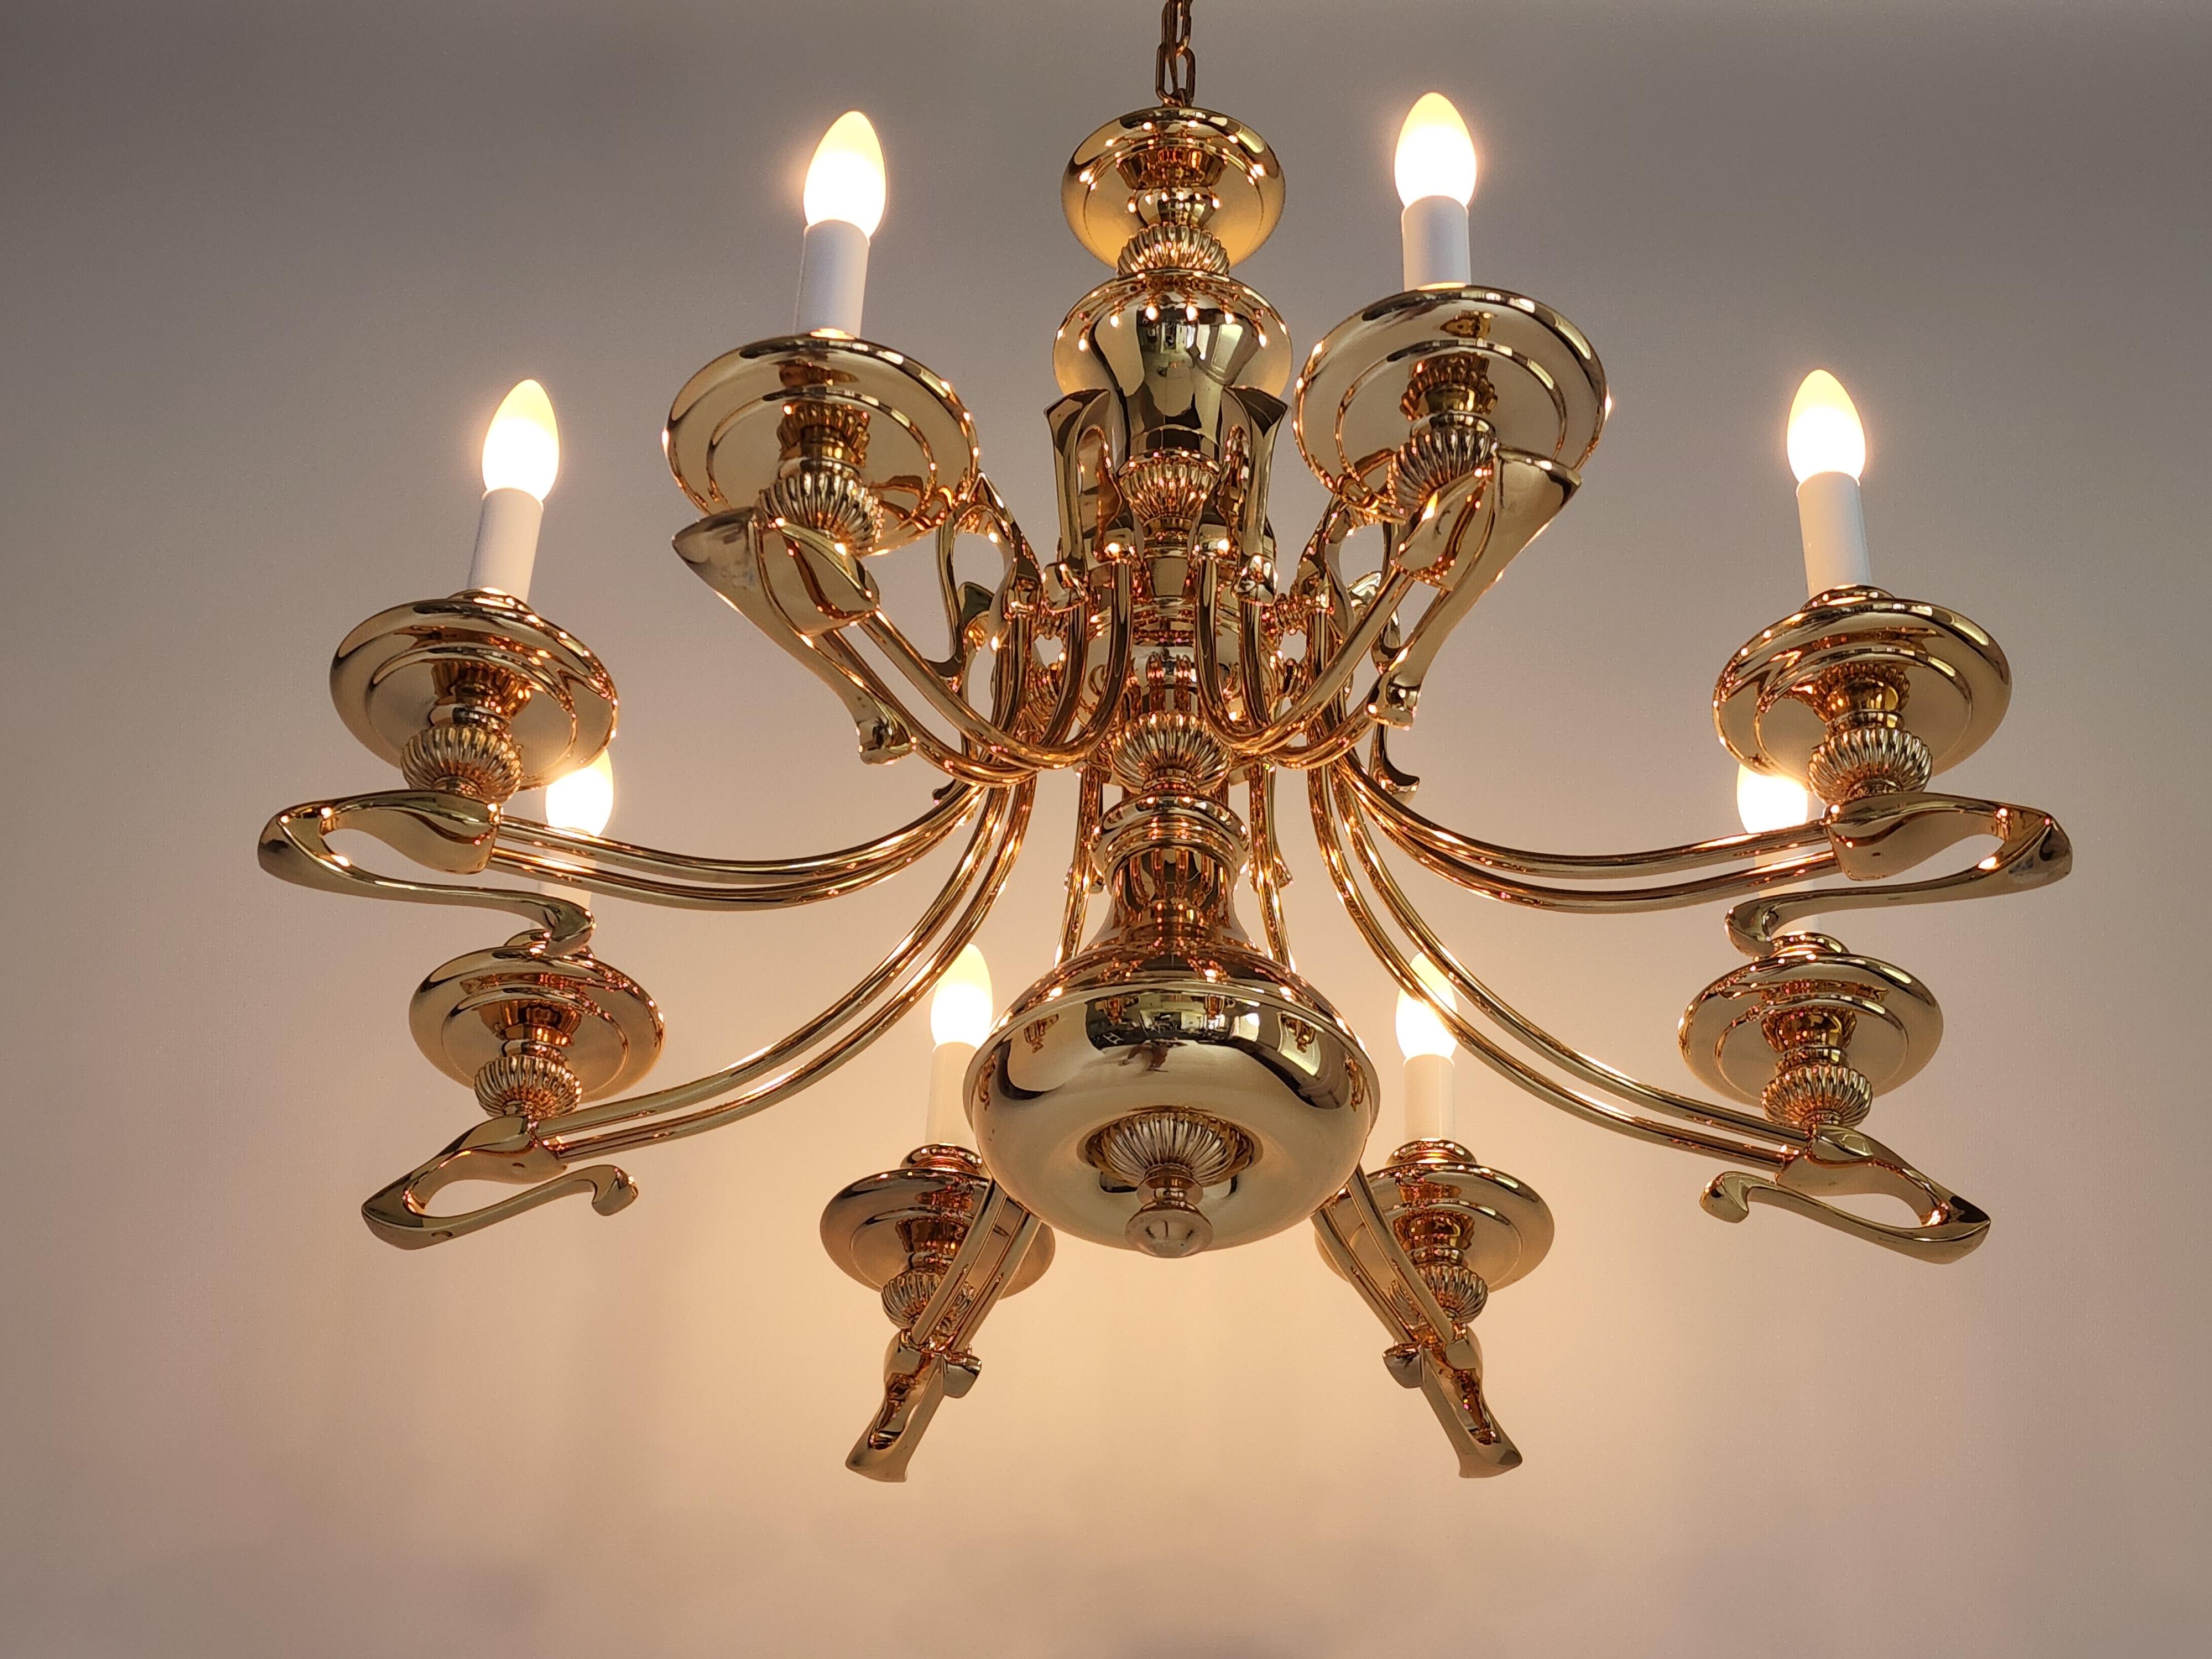 1980s Massive Art Nouveau Style Gold Plated Chandelier, Italy For Sale 3